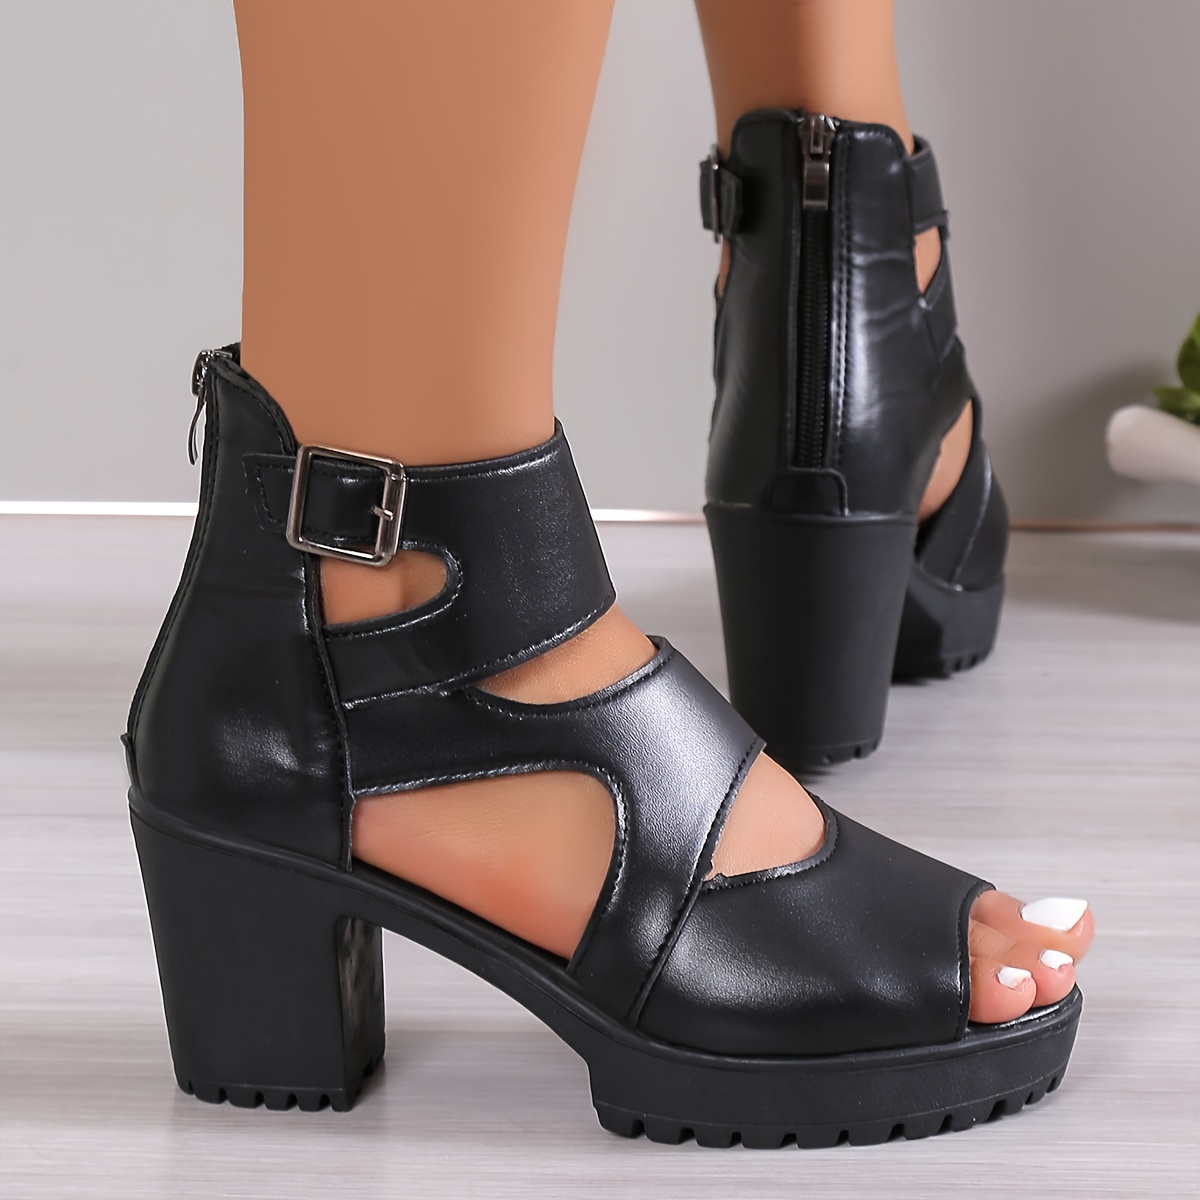 

Women's Chunky Heeled Sandals, Black Peep Toe Ankle Strap Back Zipper Heels, All-match Going Out Sandals